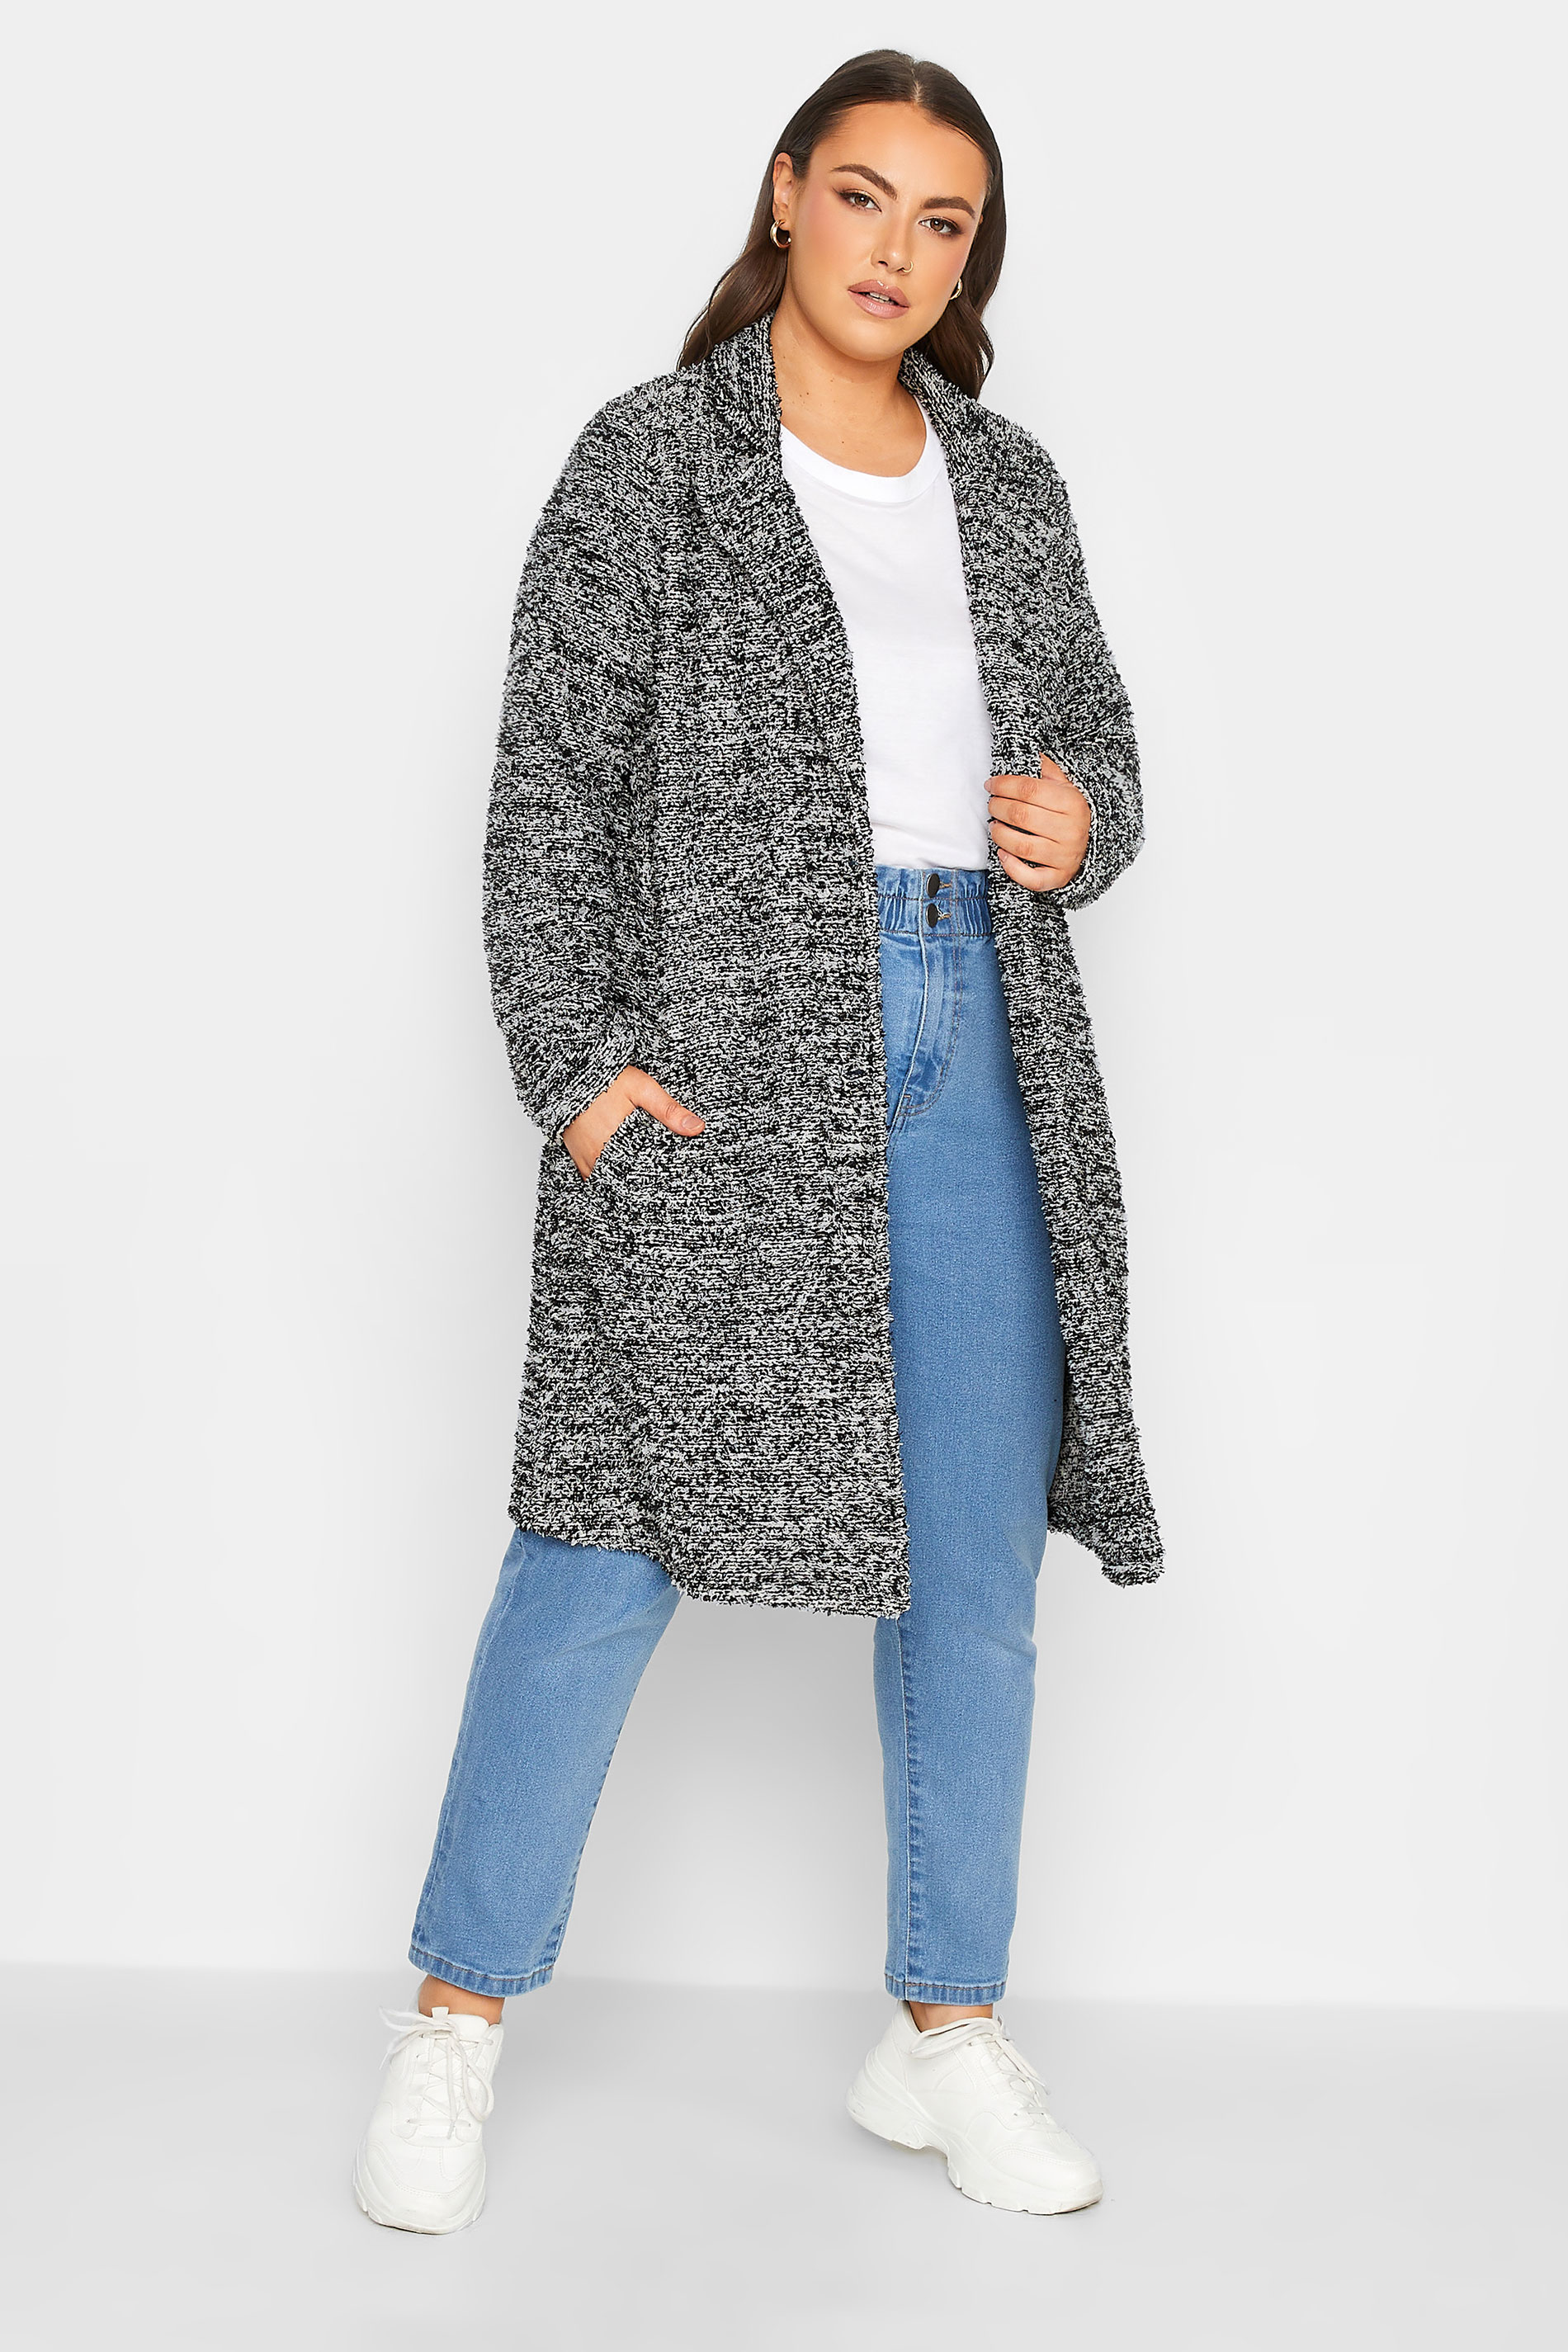 YOURS LUXURY Plus Size Black Textured Faux Fur Jacket | Yours Clothing 3